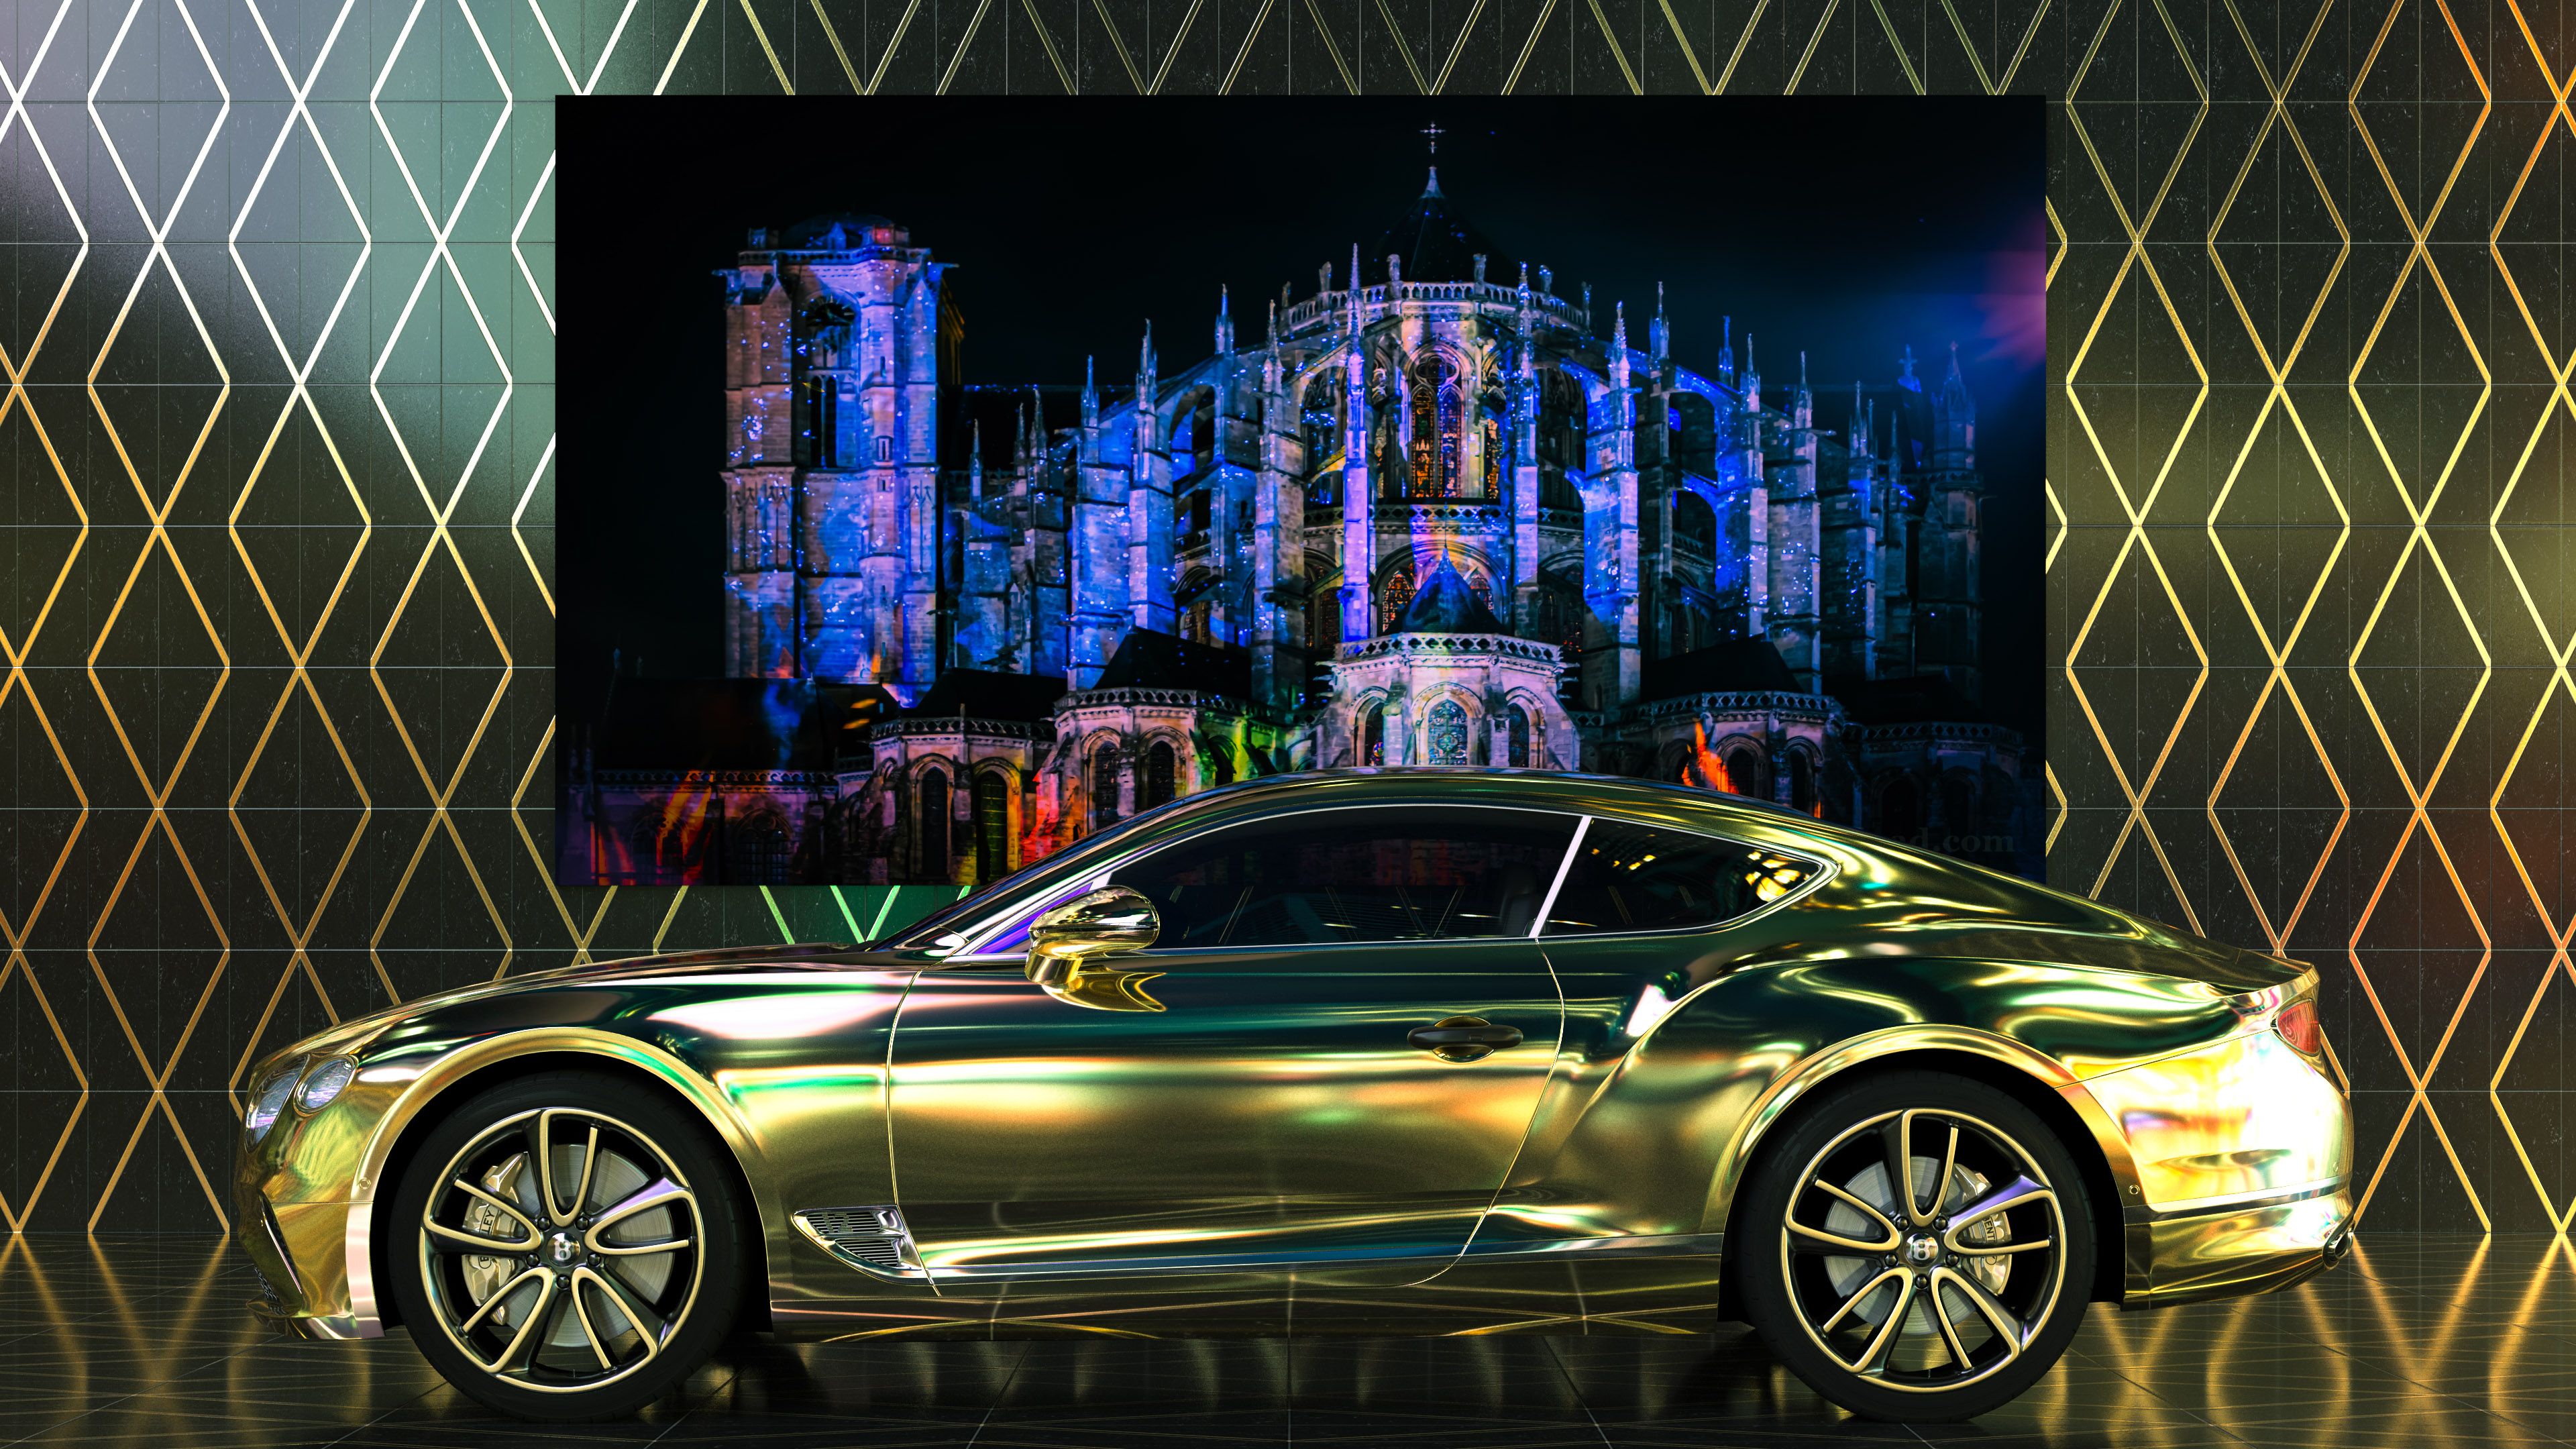 Immerse yourself in luxury with our car wallpaper featuring the gold Bentley Continental GT, a symbol of opulence and power.